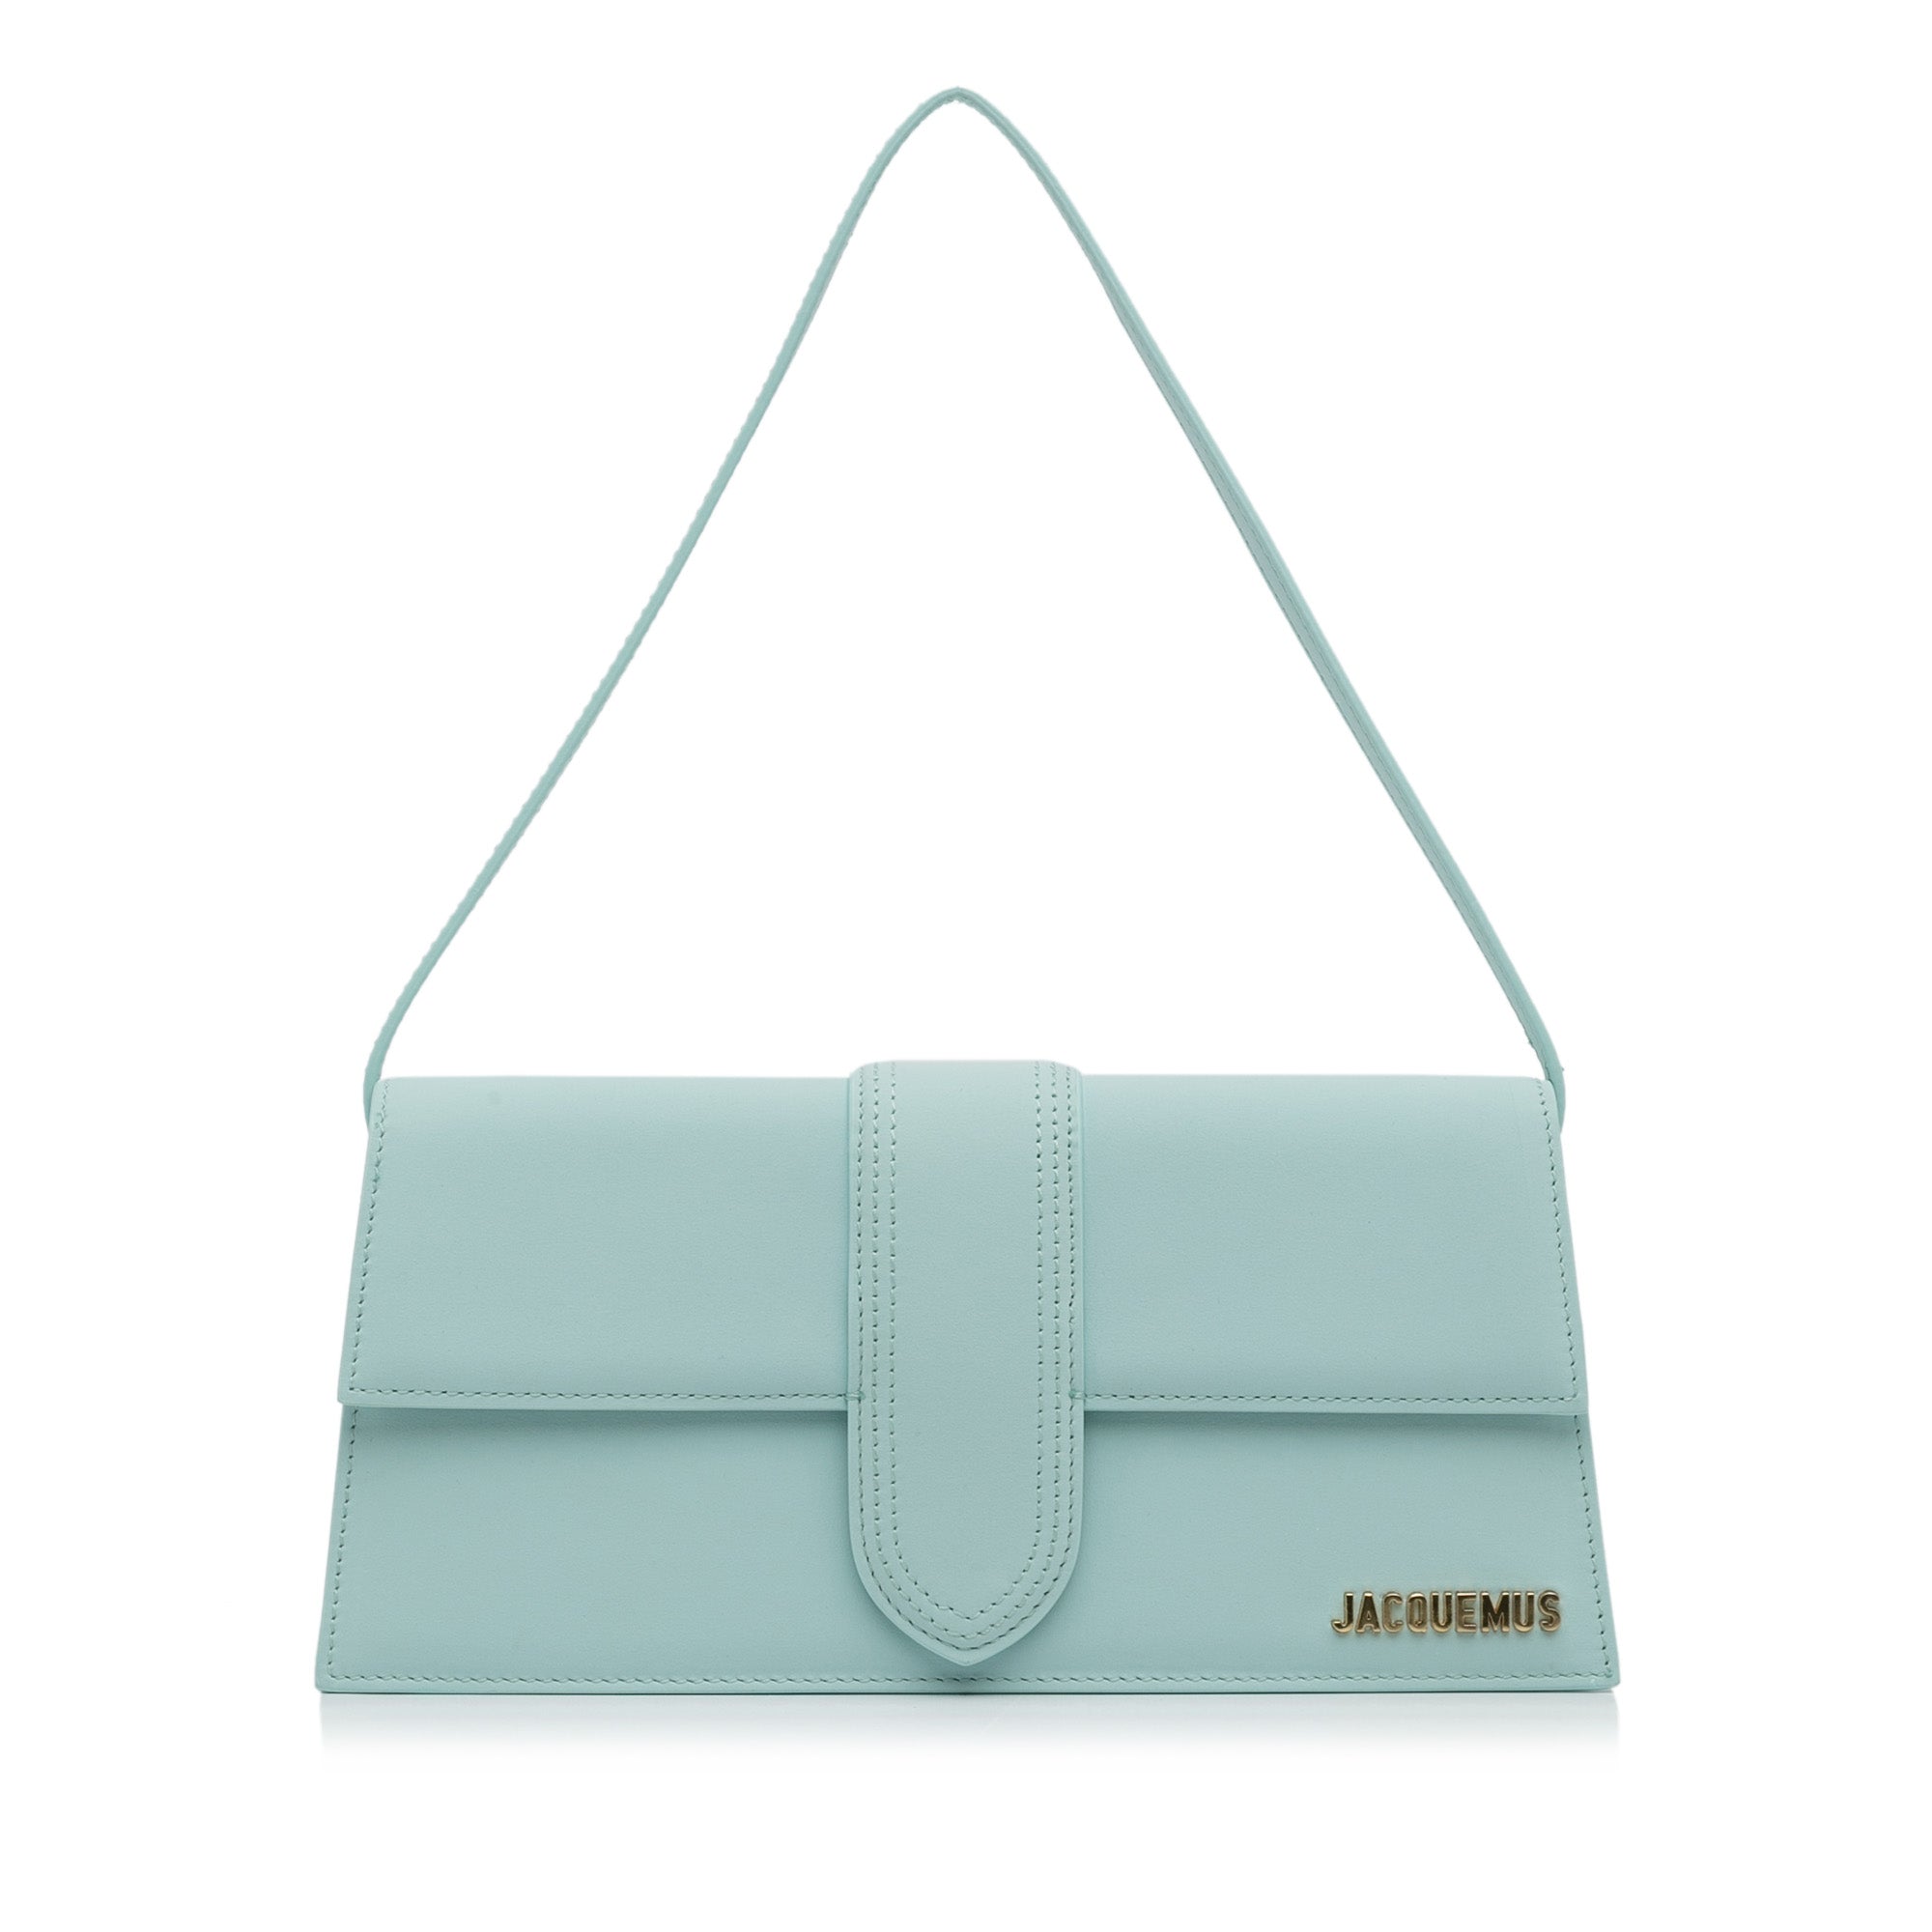 Le Bambino Leather Shoulder Bag in Blue - Jacquemus